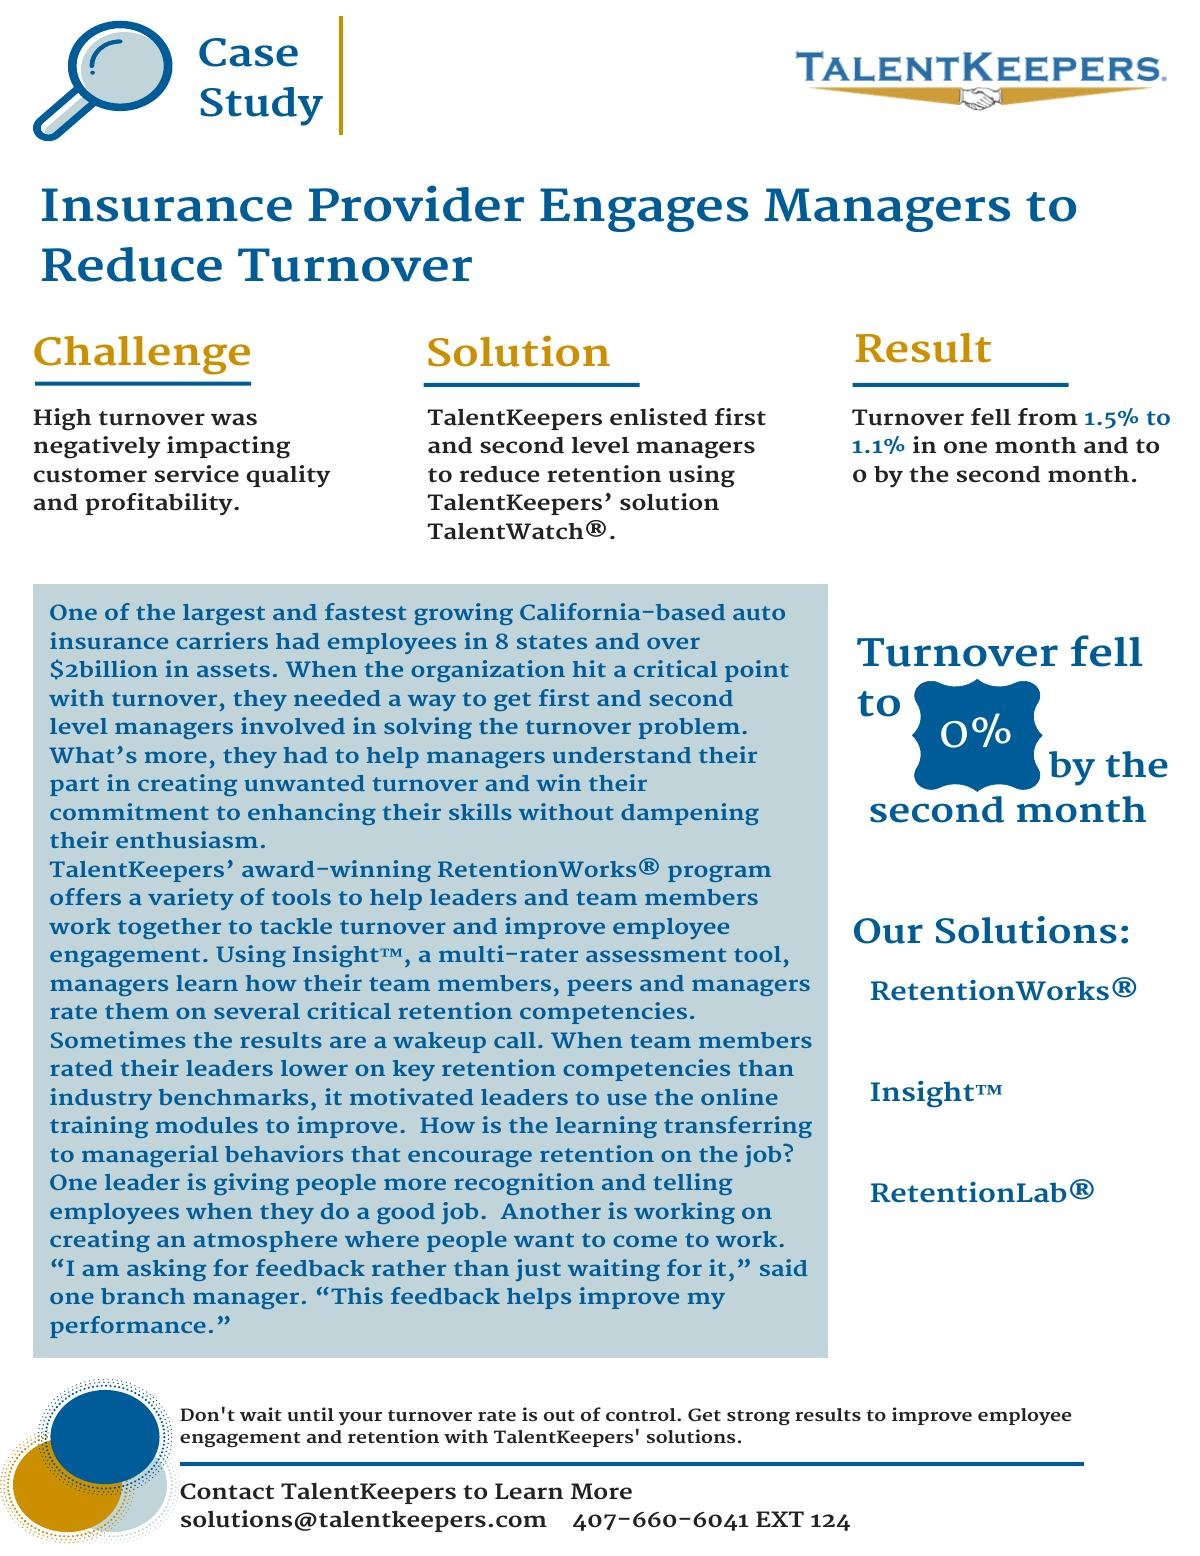 Insurance Provider Engages Managers to Reduce Turnover Case Study